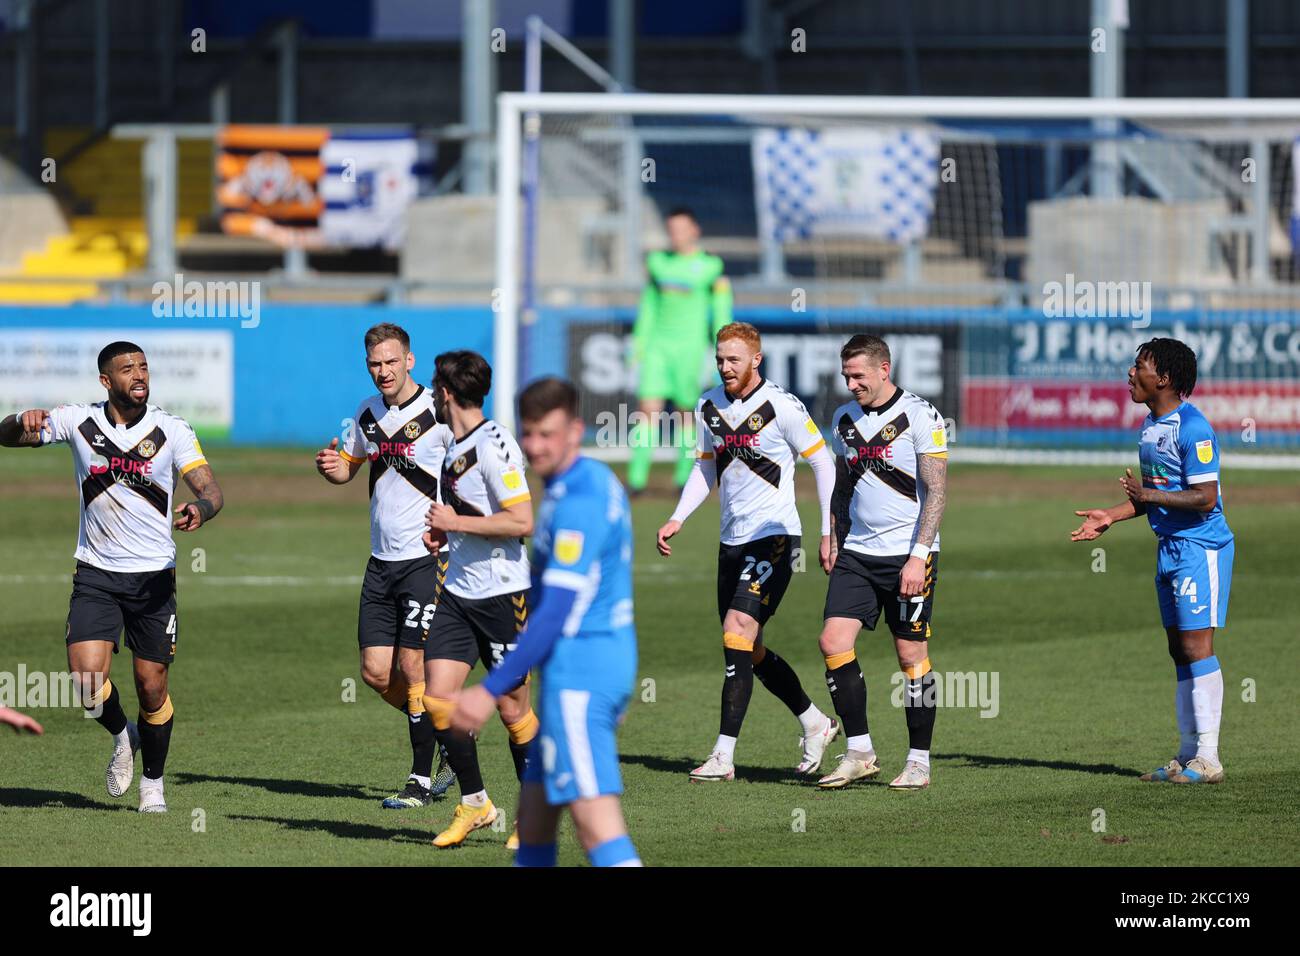 Scot Bennett of Newport County scores his team's first goal during the SkyBet League 2 match between Barrow and Newport County at the Holker Street Stadium, Barrow-in-Furness, on Friday 2nd April 2021. (Photo by Pat Scaasi/MI News/NurPhoto) Stock Photo